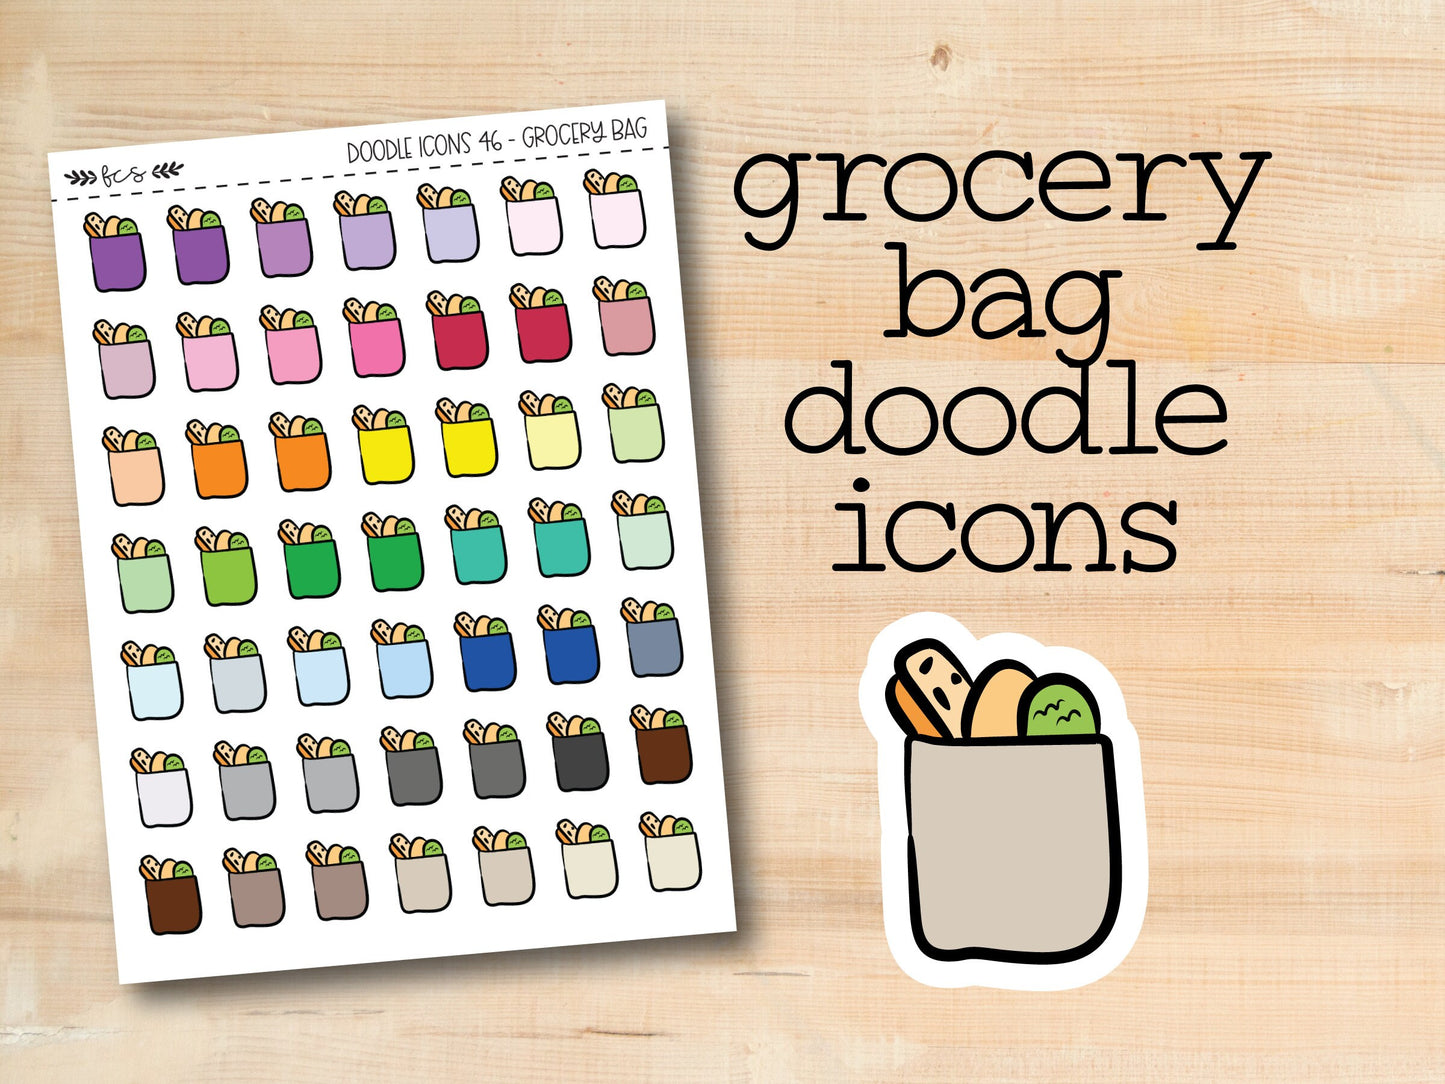 the grocery bag doodle icons are shown next to a sticker